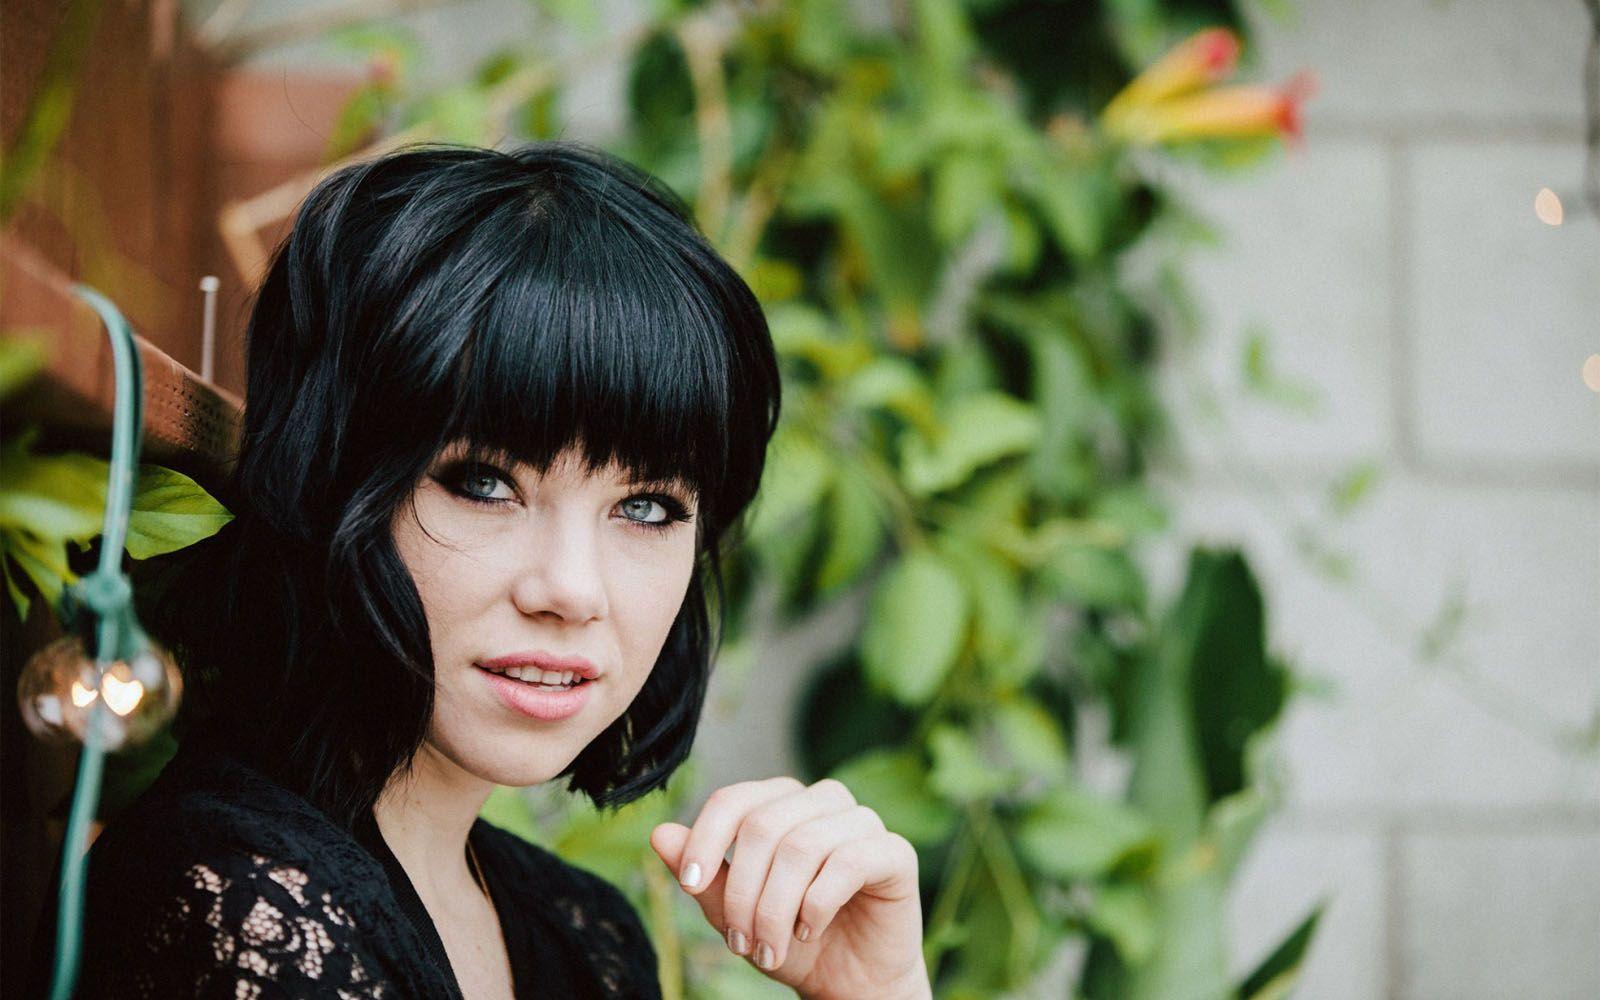 Carly Rae Jepsen Wallpapers Pictures 52557 1600x1000 px.